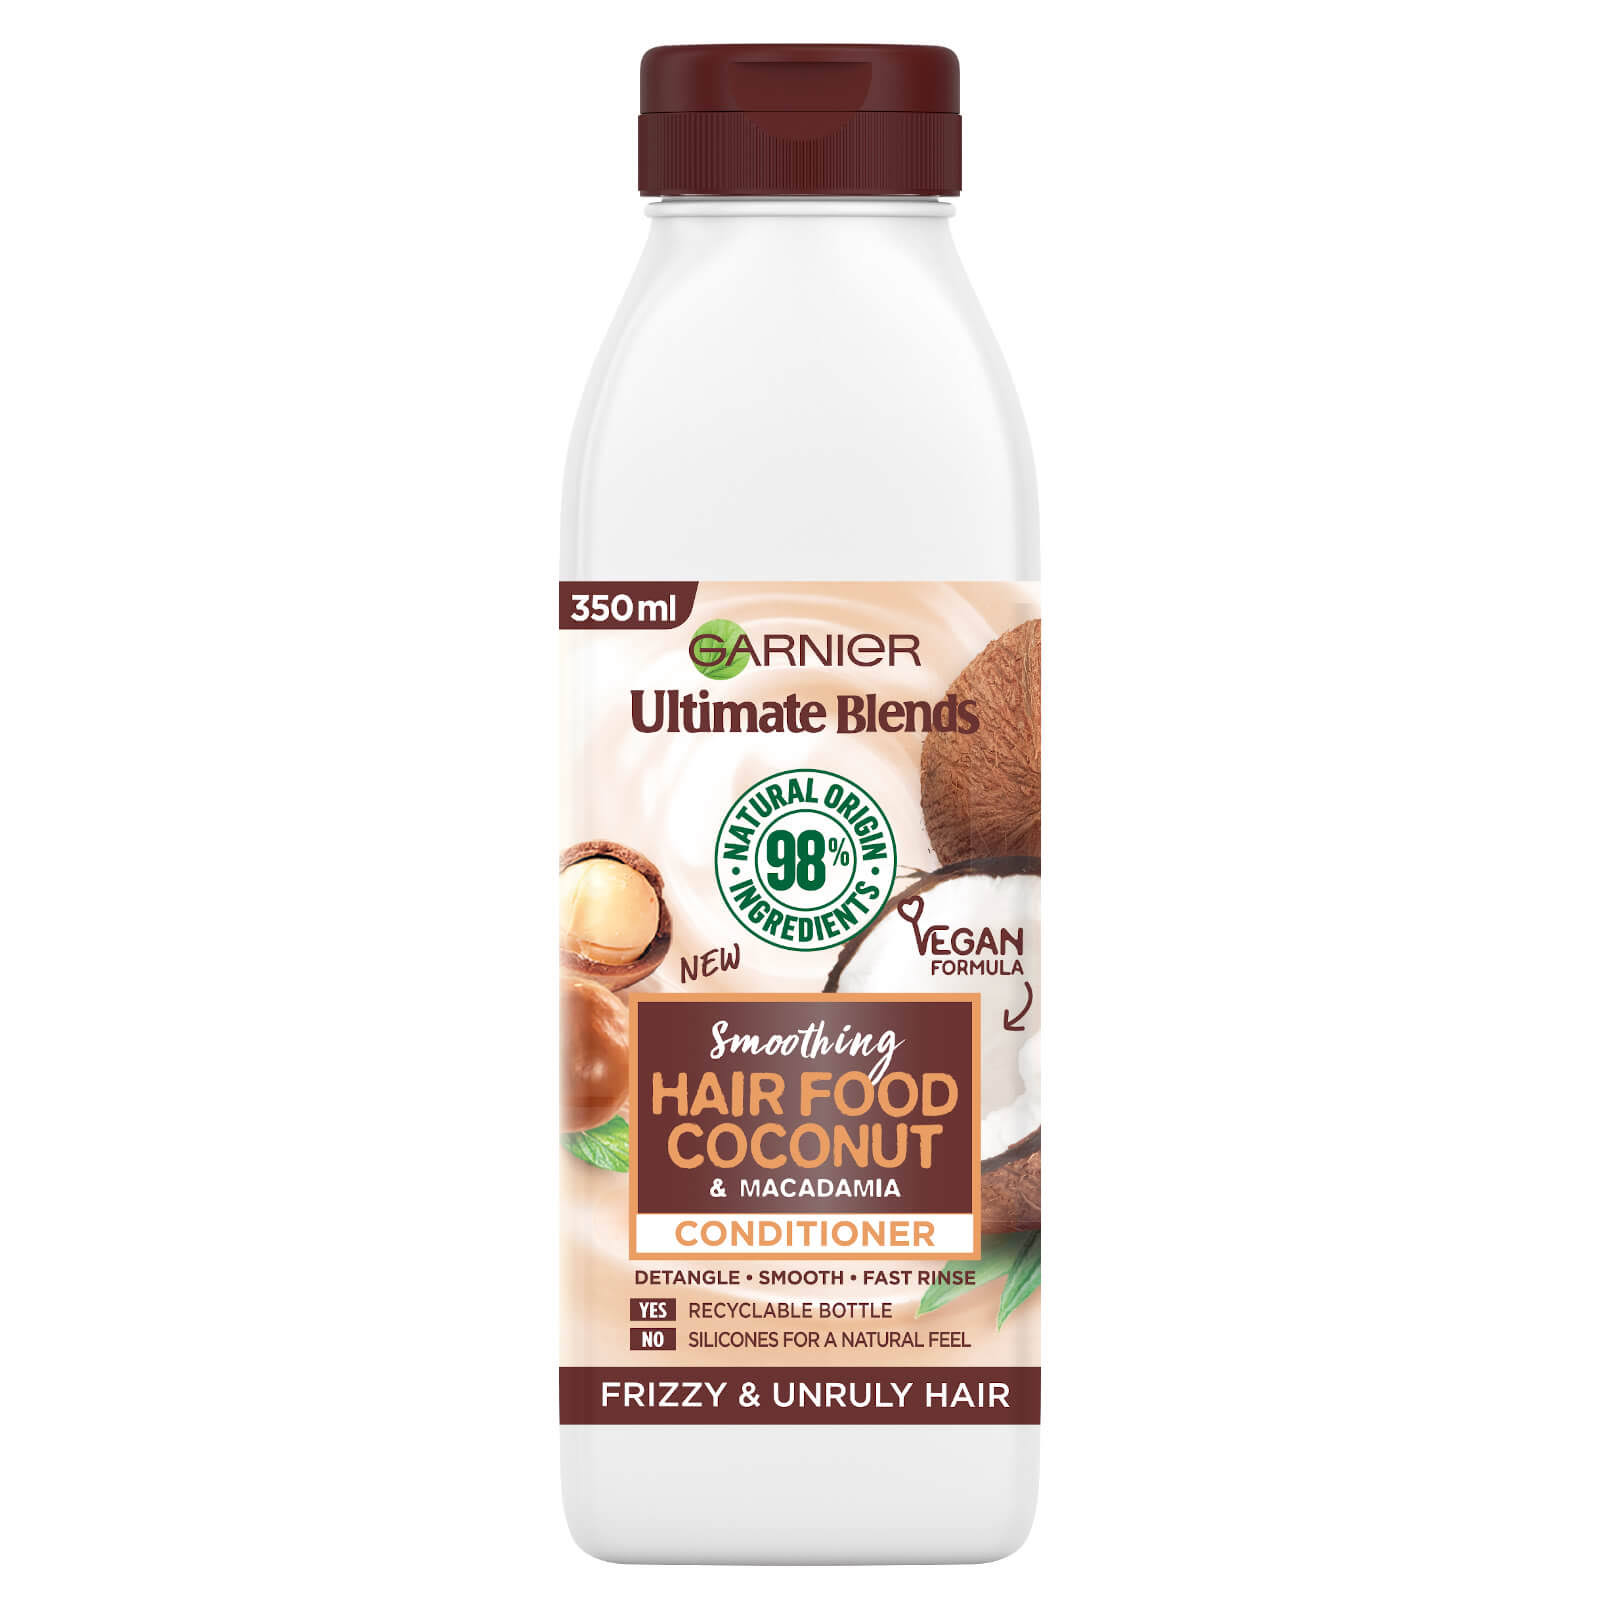 Garnier Ultimate Blends Smoothing Hair Food Coconut Conditioner 350 ml